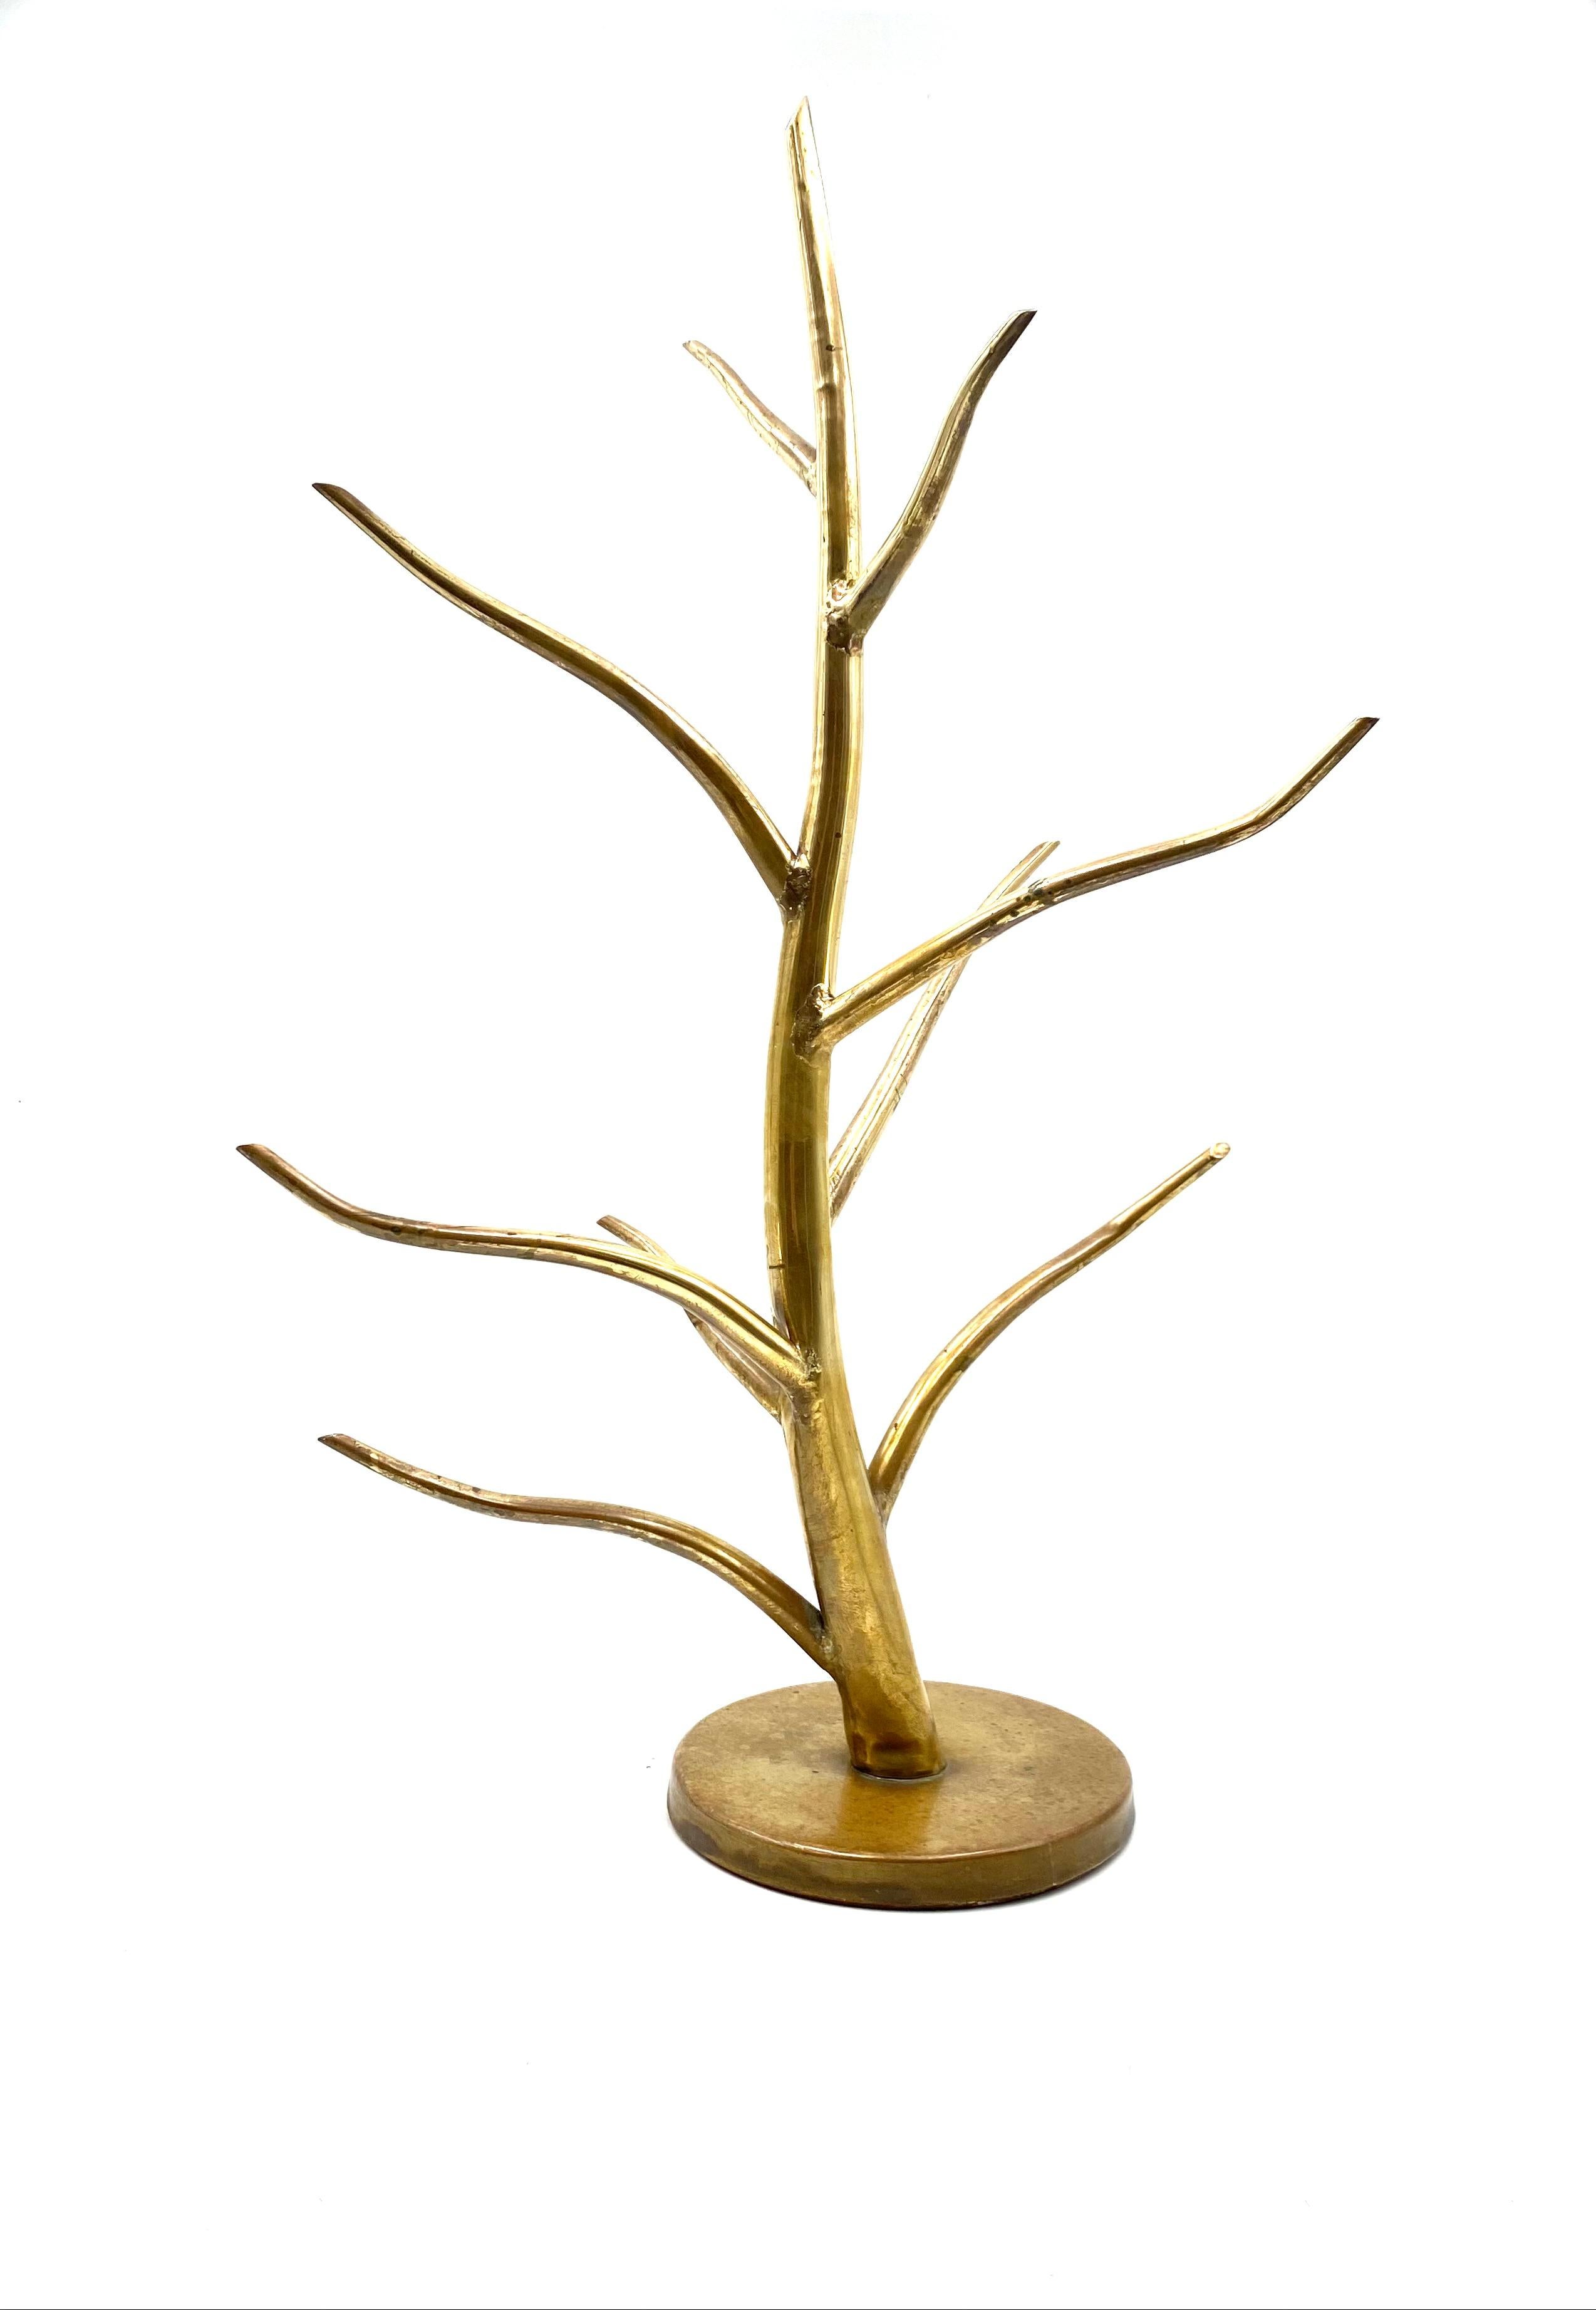 Midcentury Brass Plant-Shaped Stand, Italy, 1970s For Sale 3